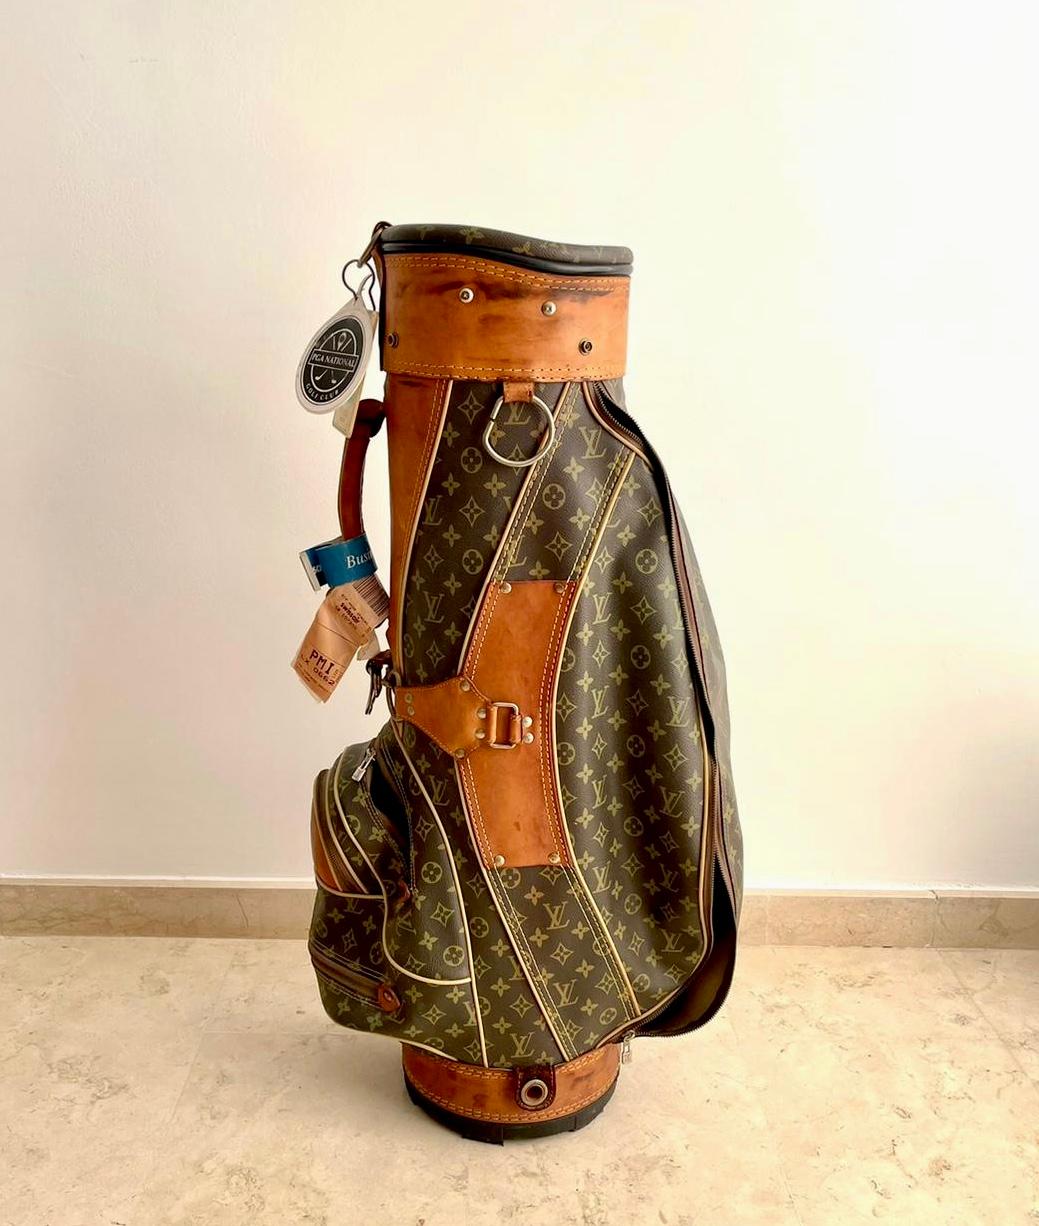 Vintage Louis Vuitton Original Monogram  Golf Bag 1970´s
The vintage Louis Vuitton golf bag takes timeless creation to a new level of sophistication and charm. Made from the finest materials that you would expect from the Louis Vuitton House. When